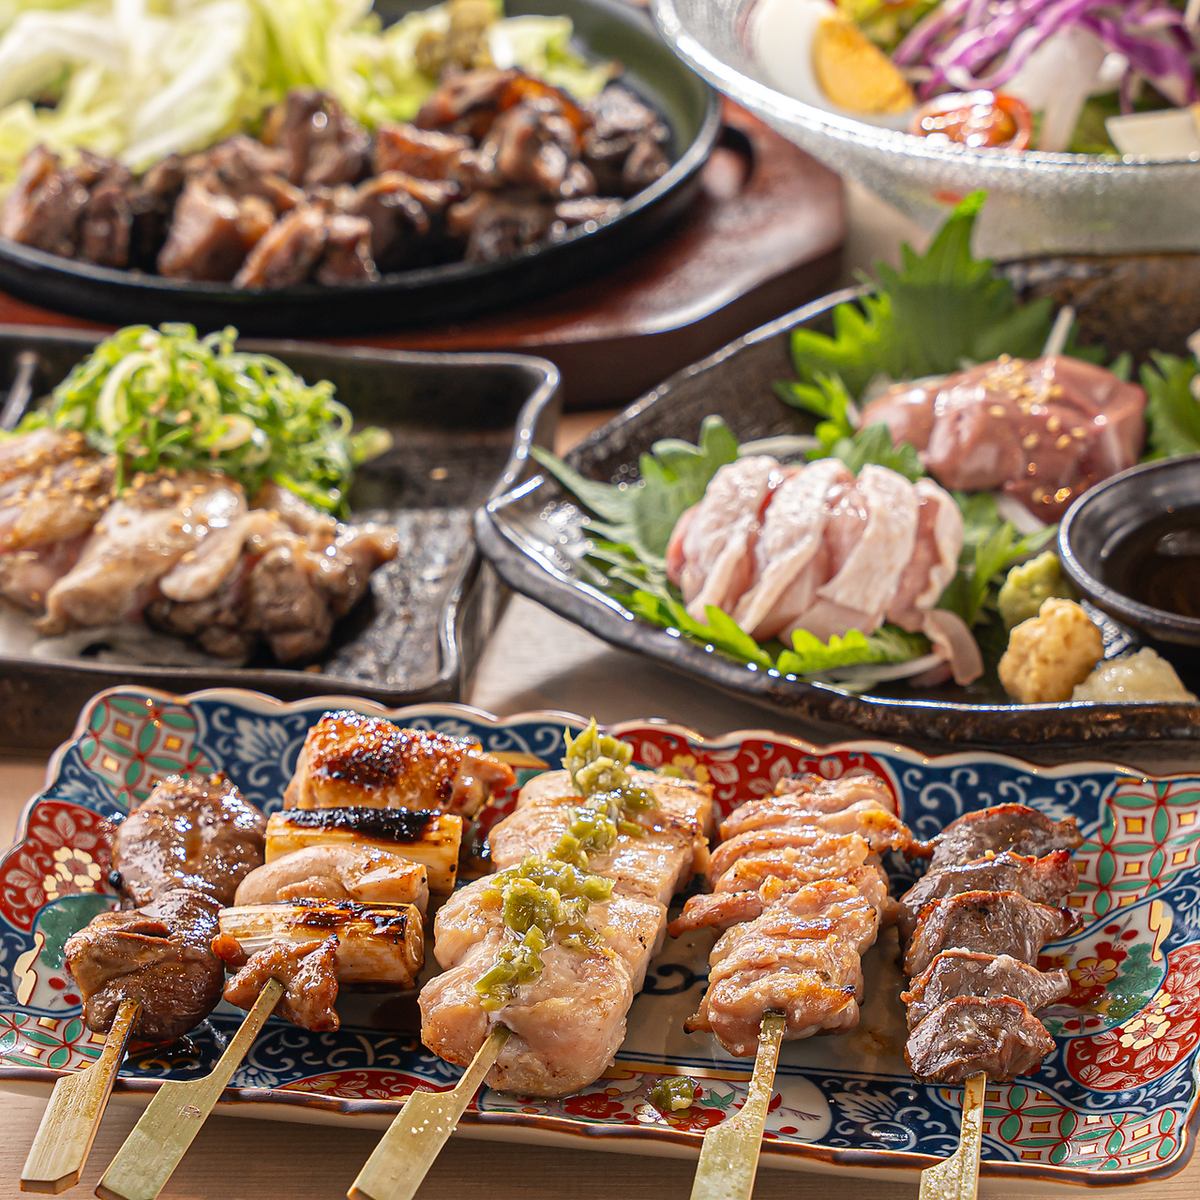 About a 6-minute walk from the station! Enjoy authentic, charcoal-grilled juicy yakitori!